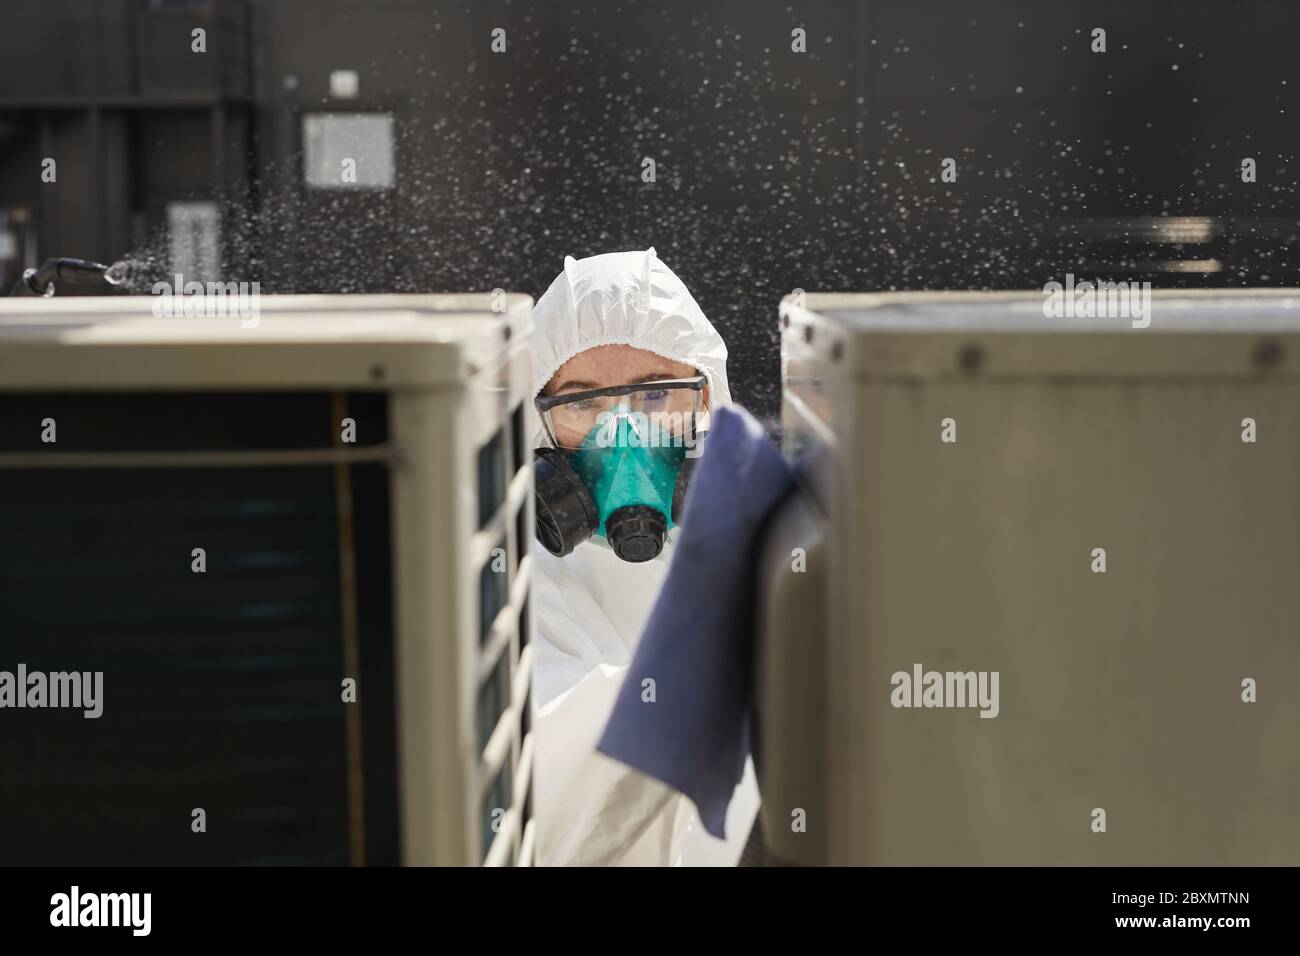 Portrait of female worker wearing protective suit and respirator disinfecting surfaces outdoors lit by sunlight, copy space Stock Photo